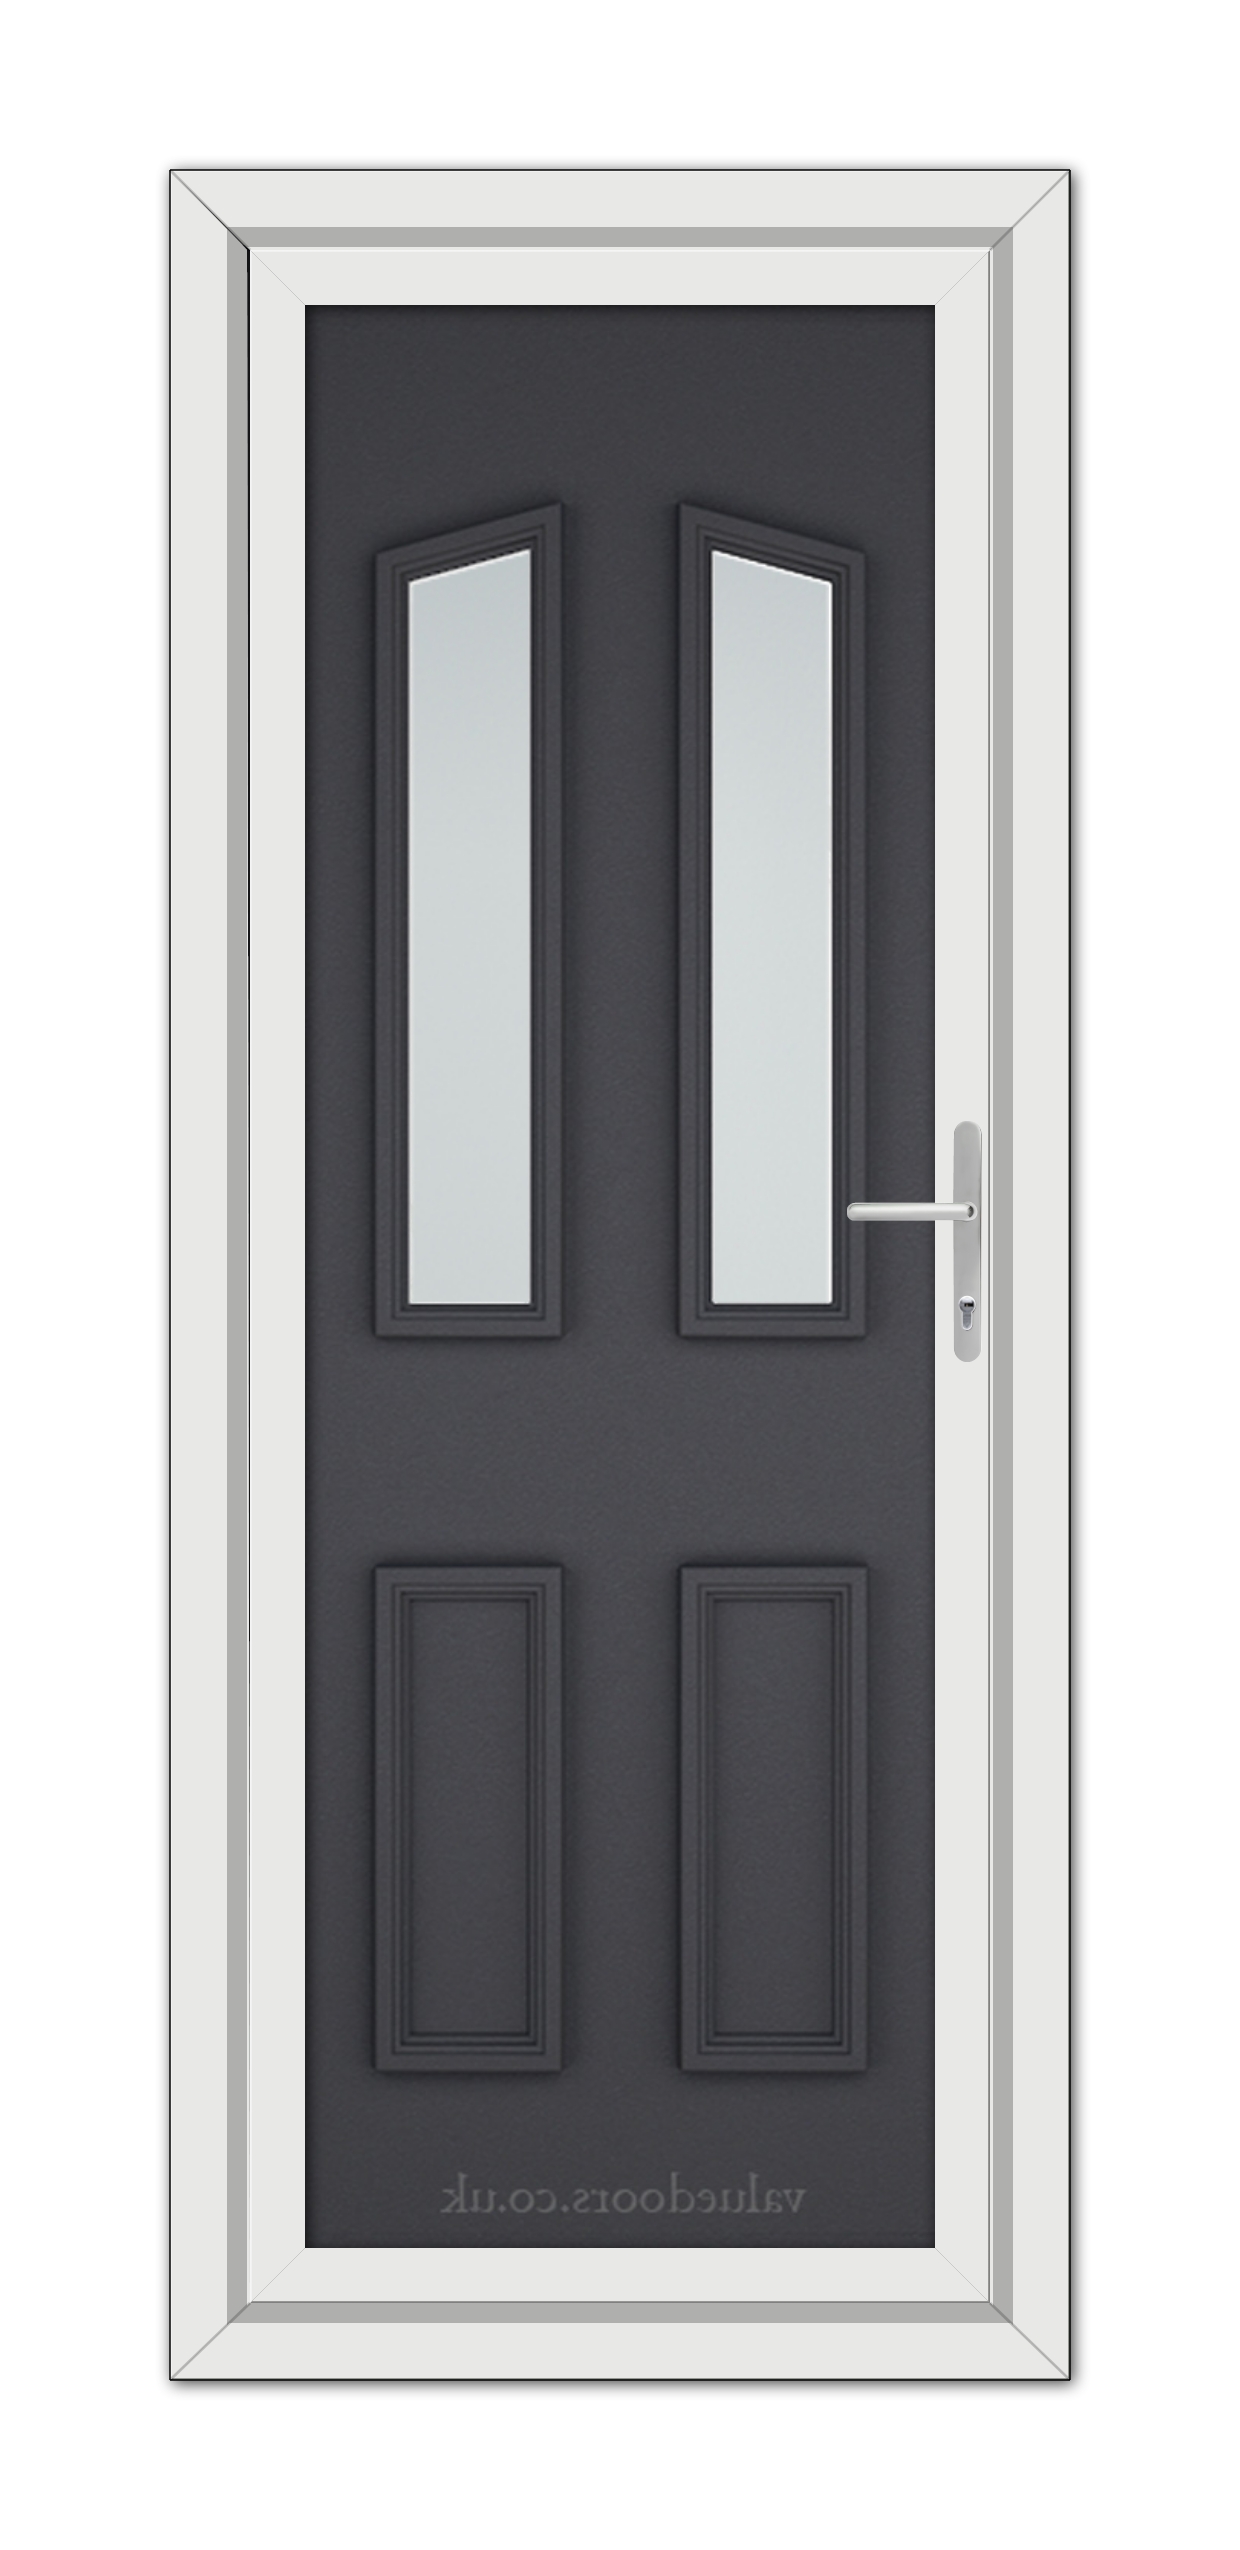 A Grey Grained Kensington uPVC Door with two vertical glass panels and a white frame, featuring a silver handle on the right.